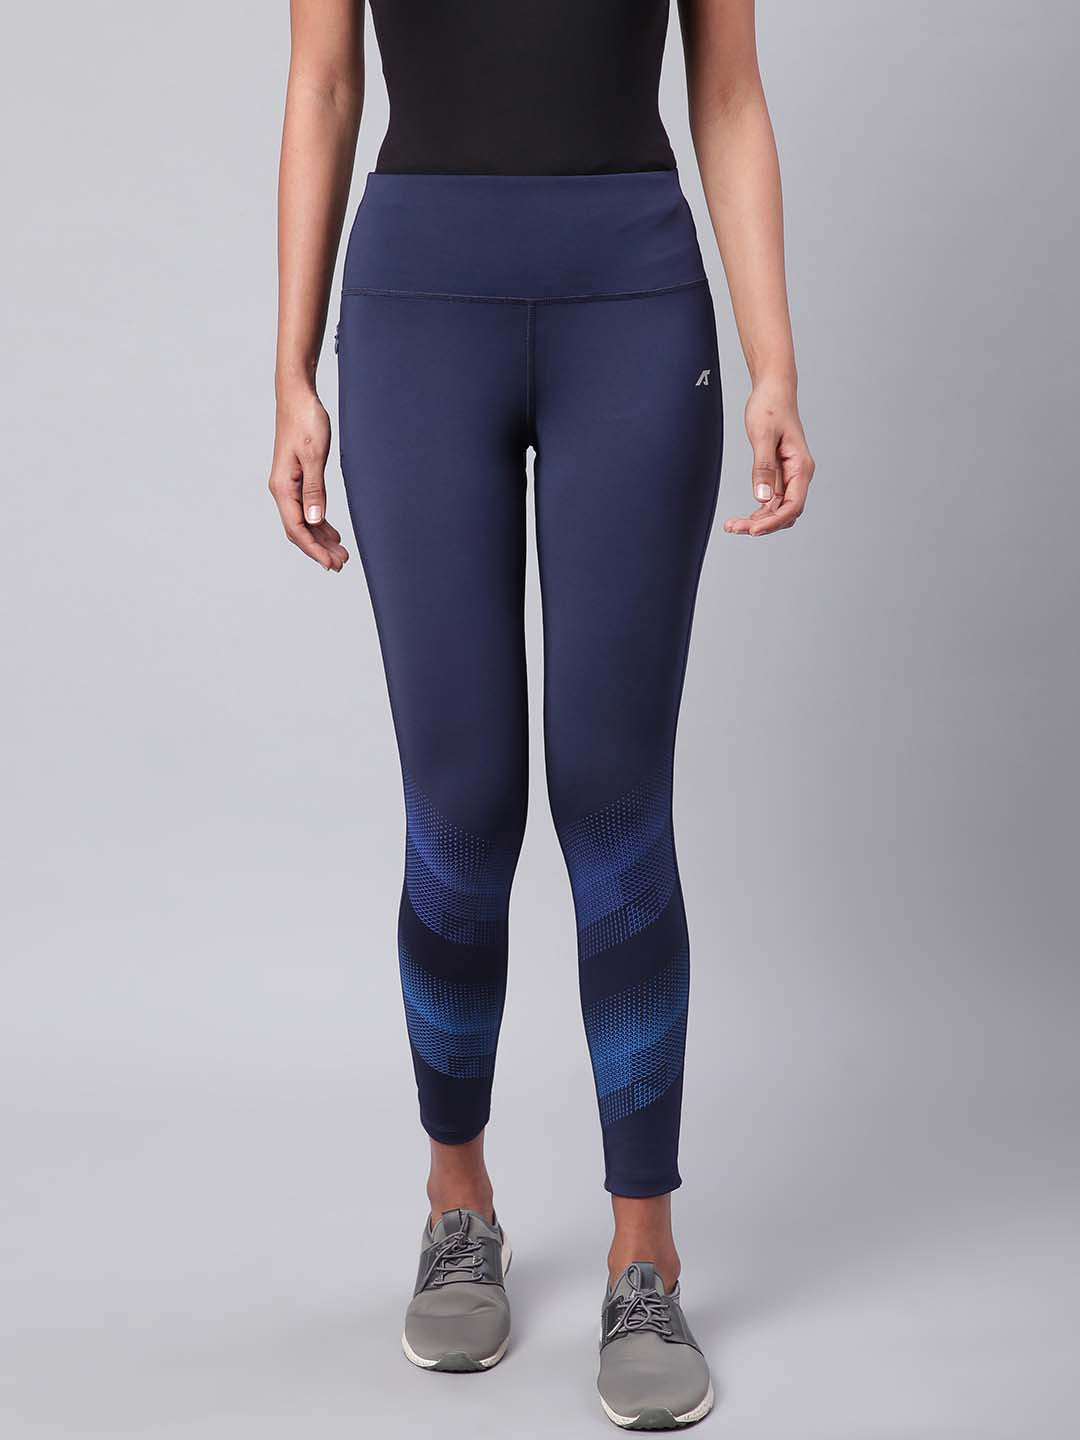 Alcis Women Navy Blue Solid Secure Fit Cropped Training Tights